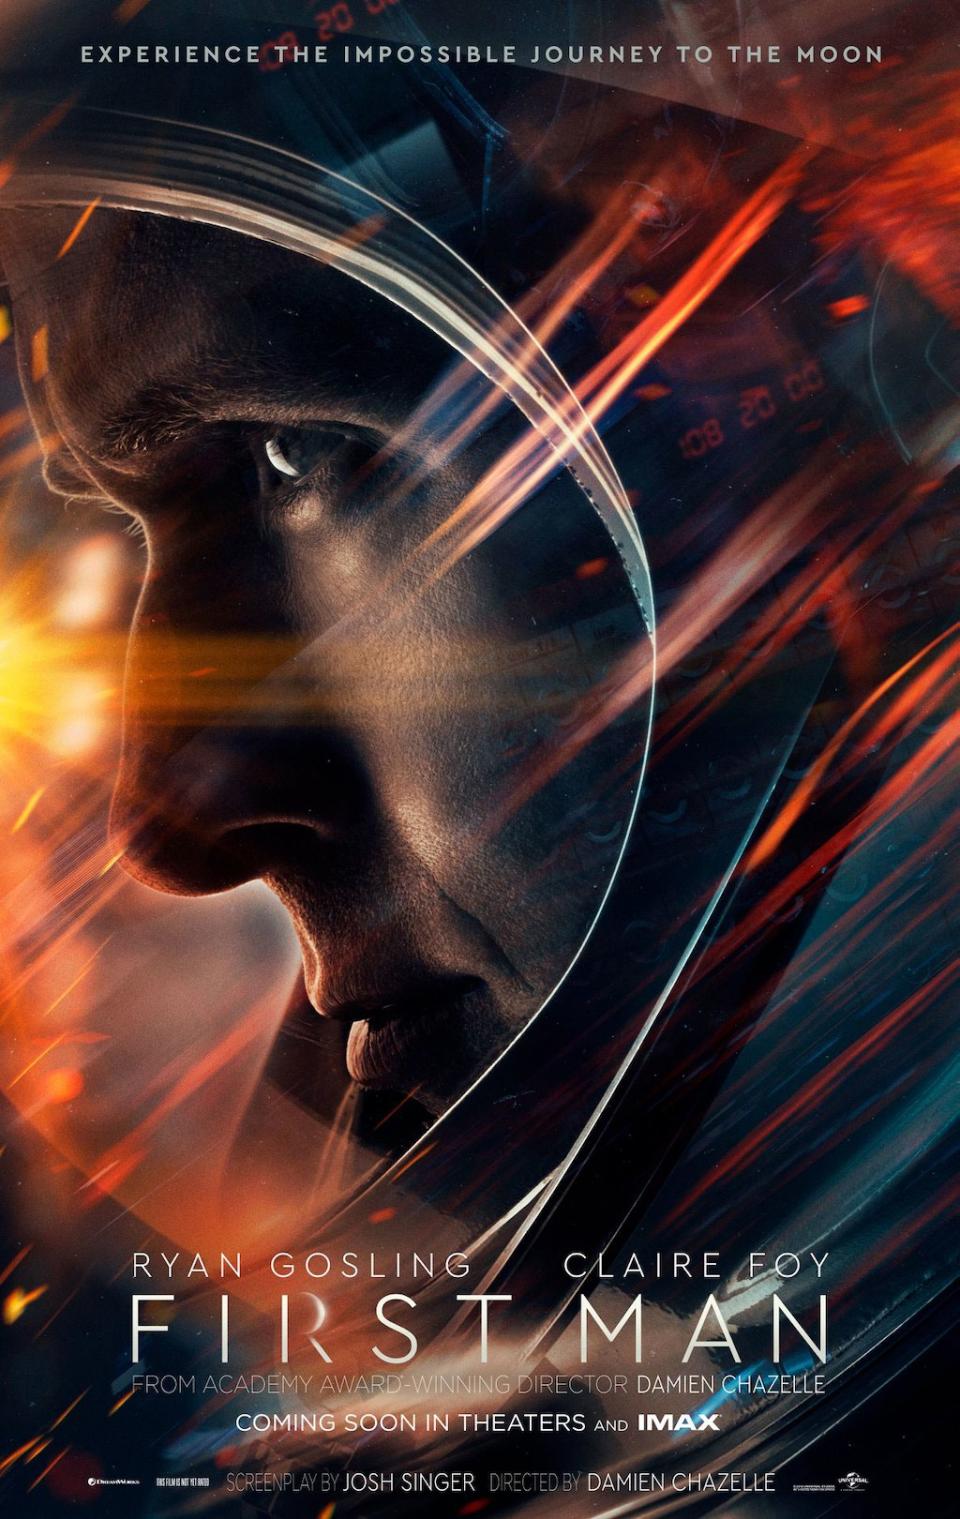 Universal Pictures’ first movie poster for “First Man,” directed by Damien Chazelle and starring Ryan Gosling and Claire Foy. <cite>Universal Pictures</cite>